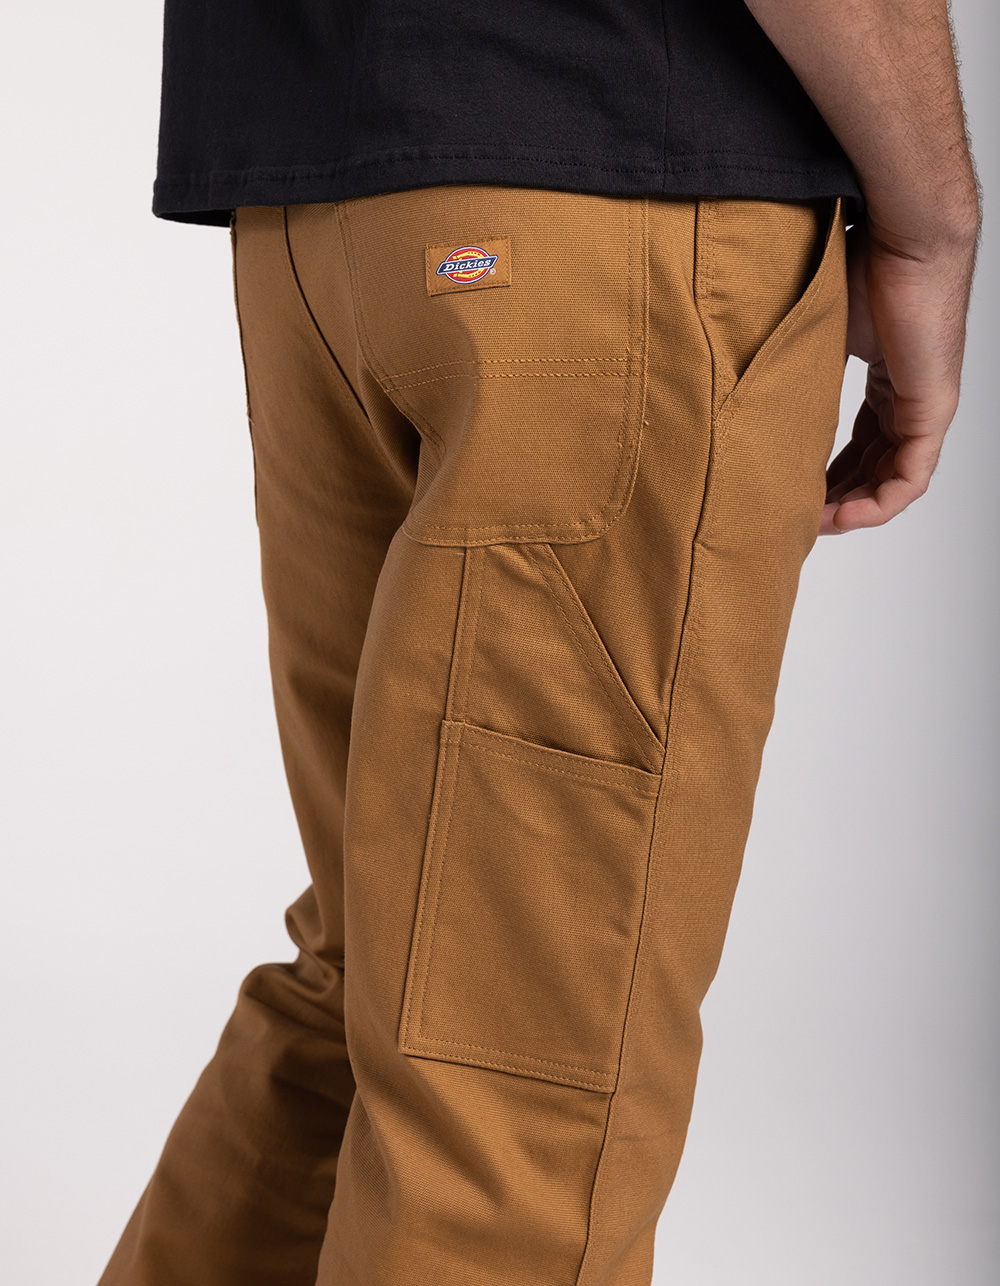 Carhartt® Men's Washed Duck 80G Insulated Pants - Big and Tall